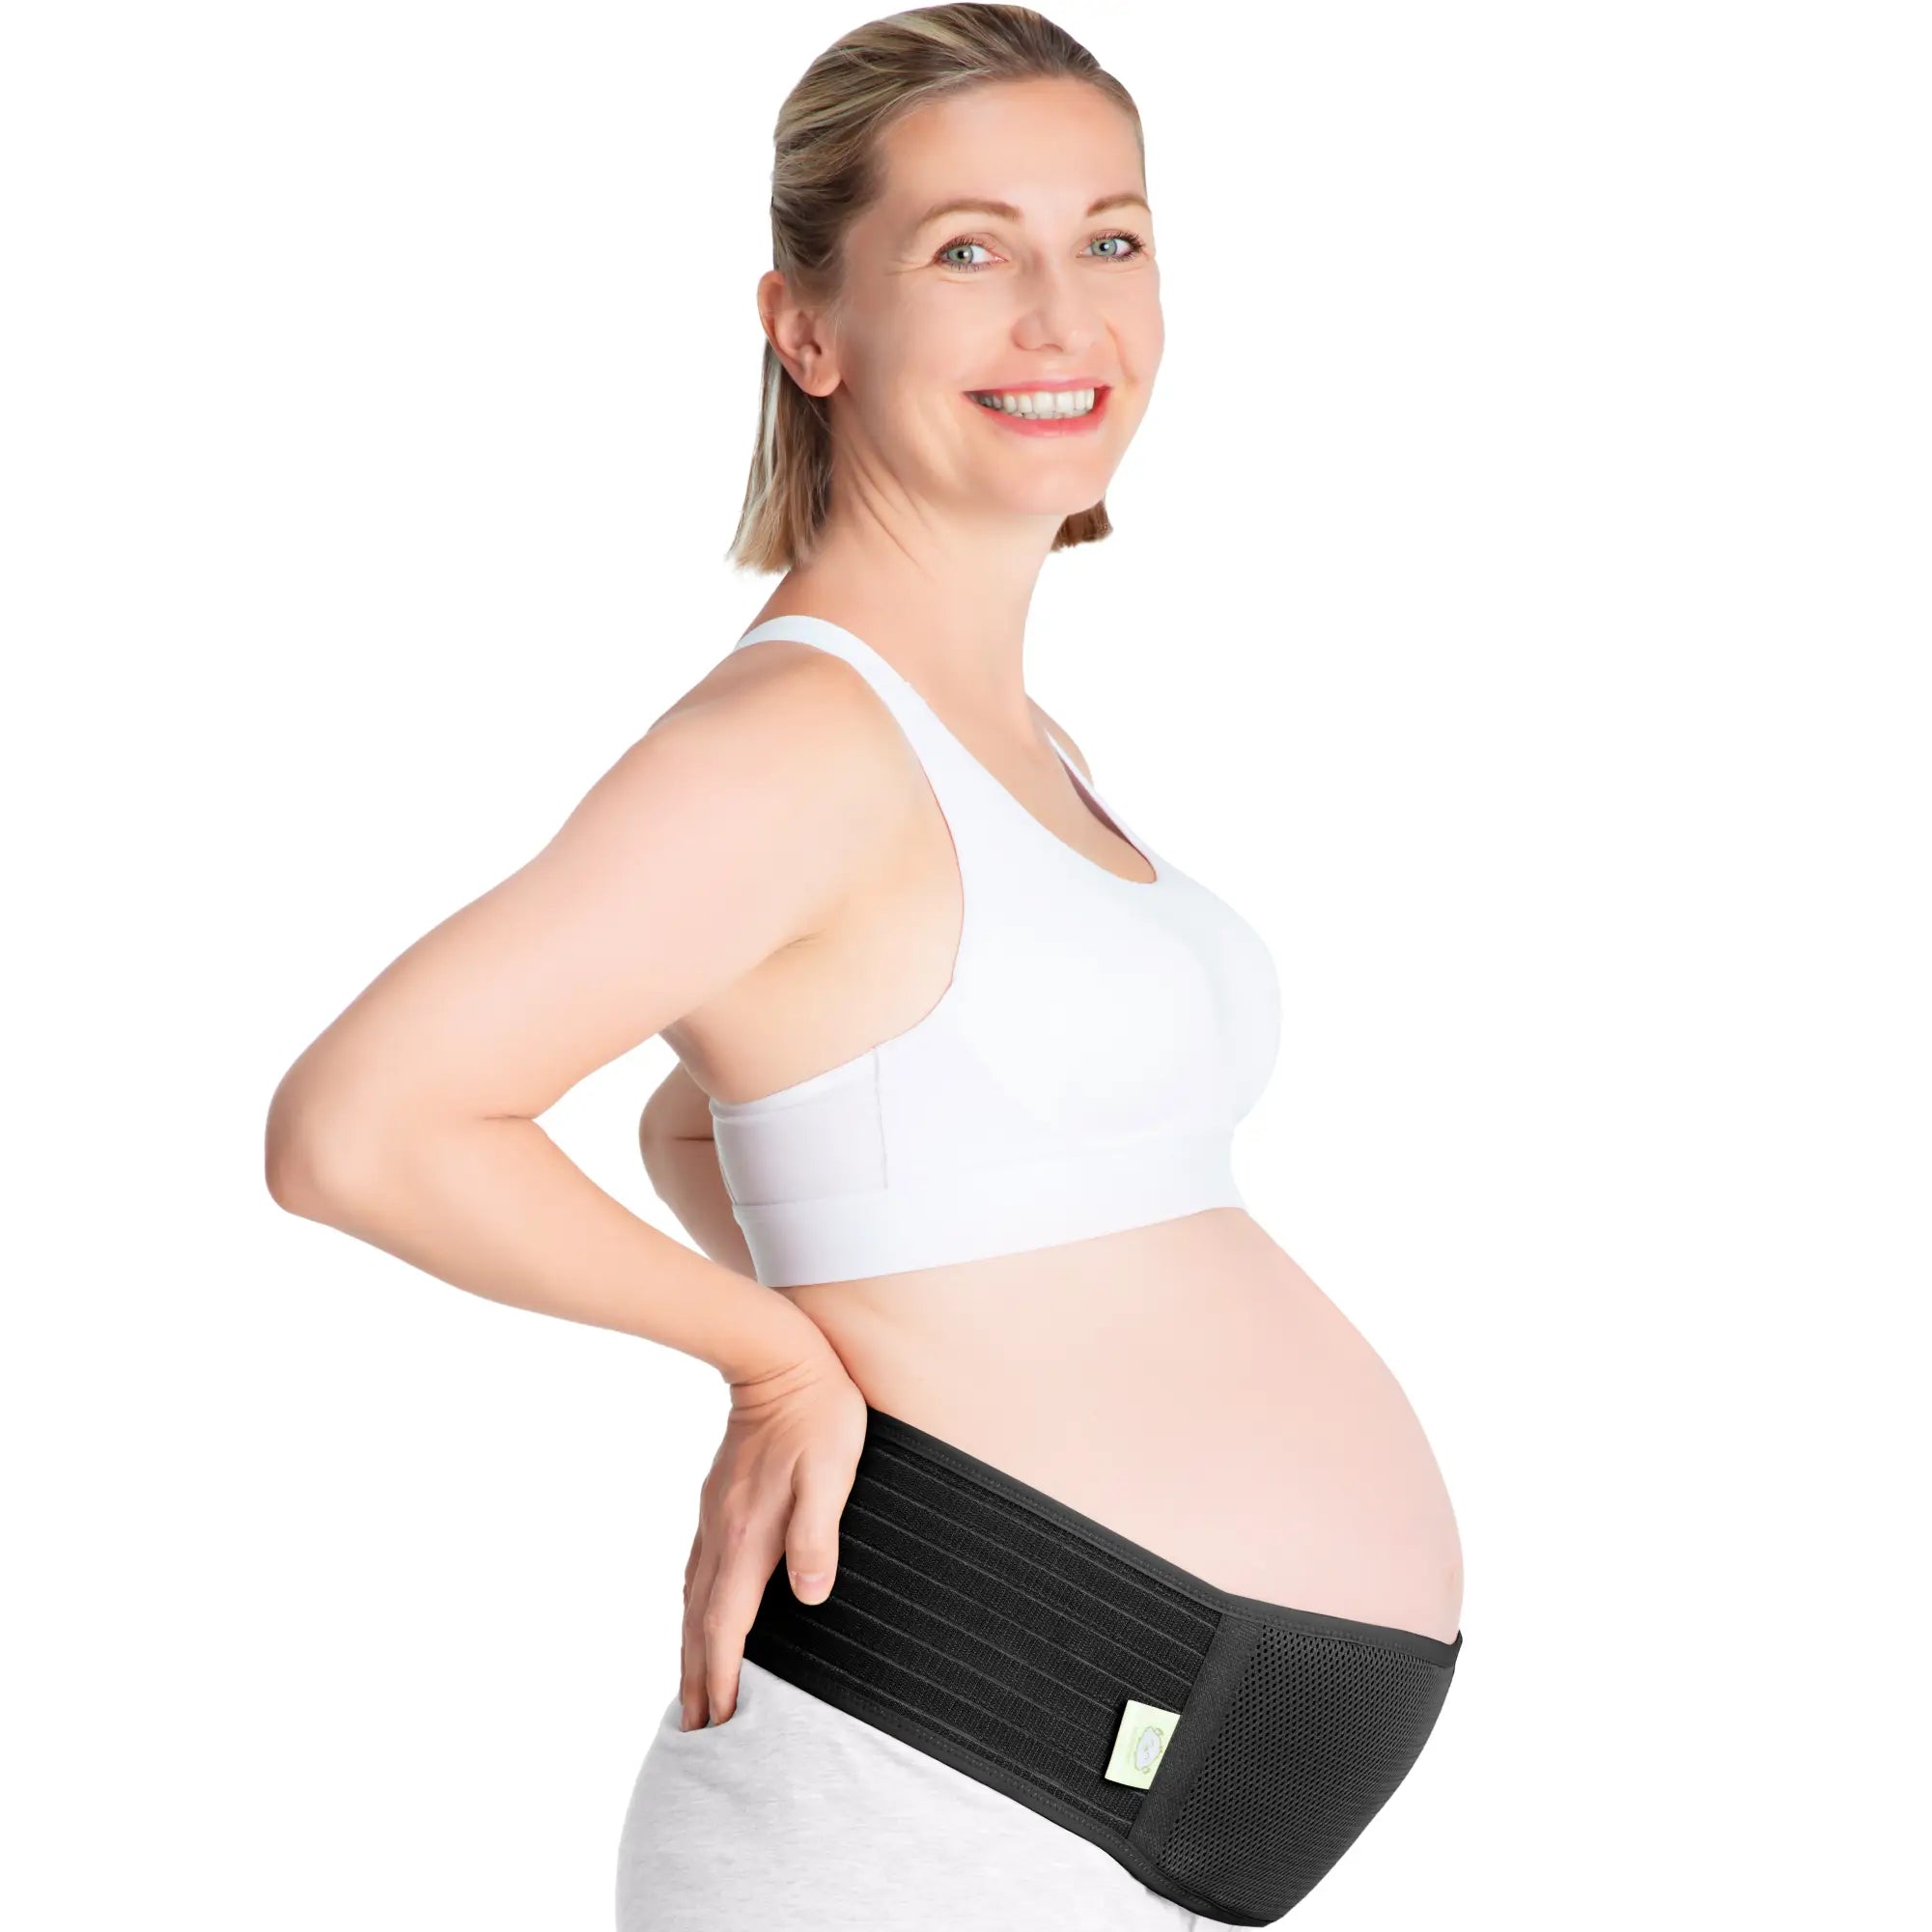 Baby Belly Band SPORT Maternity Support Belt Pregnancy Postpartum -   Canada